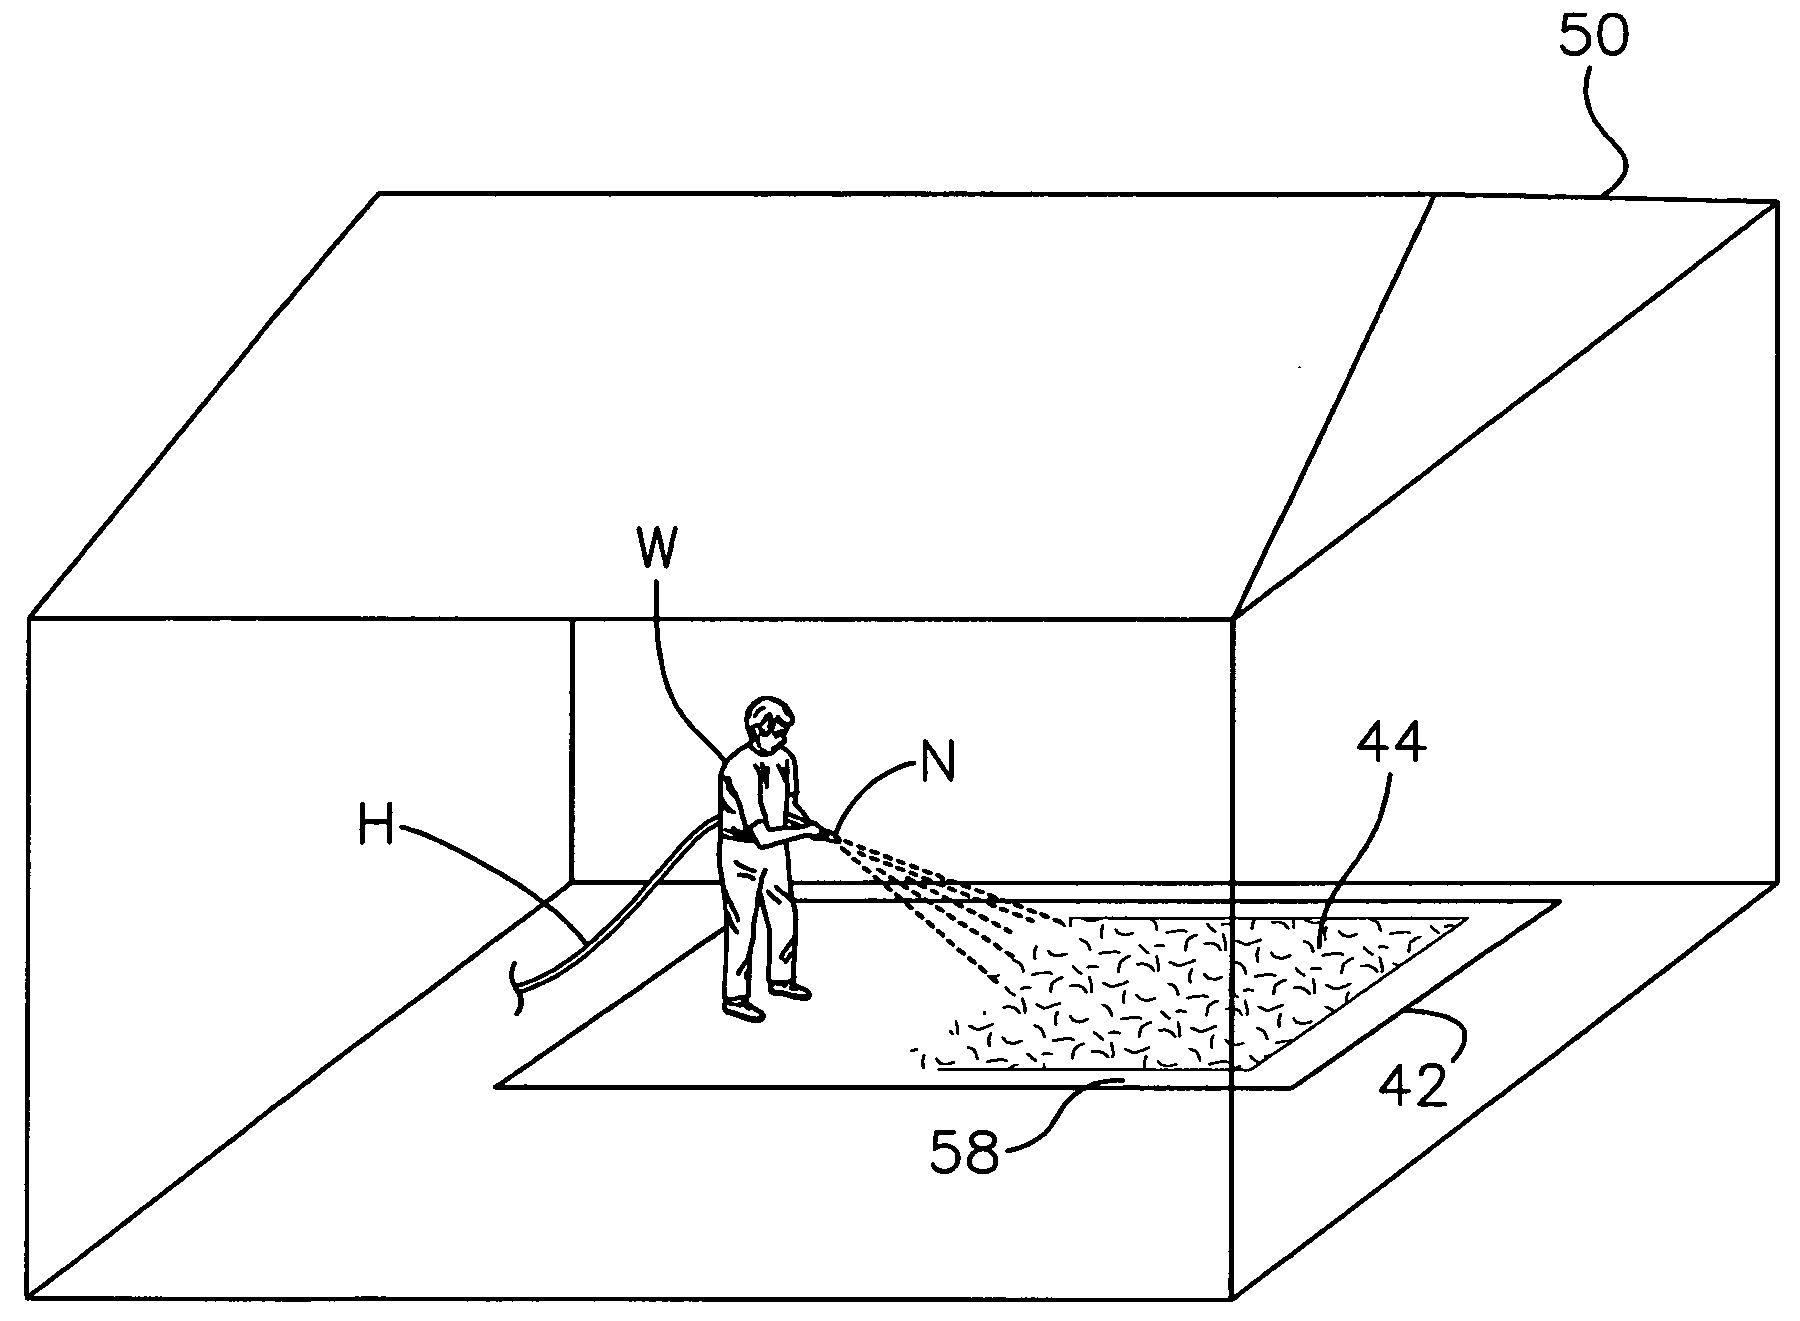 Secondary containment panels and process for making and installing same